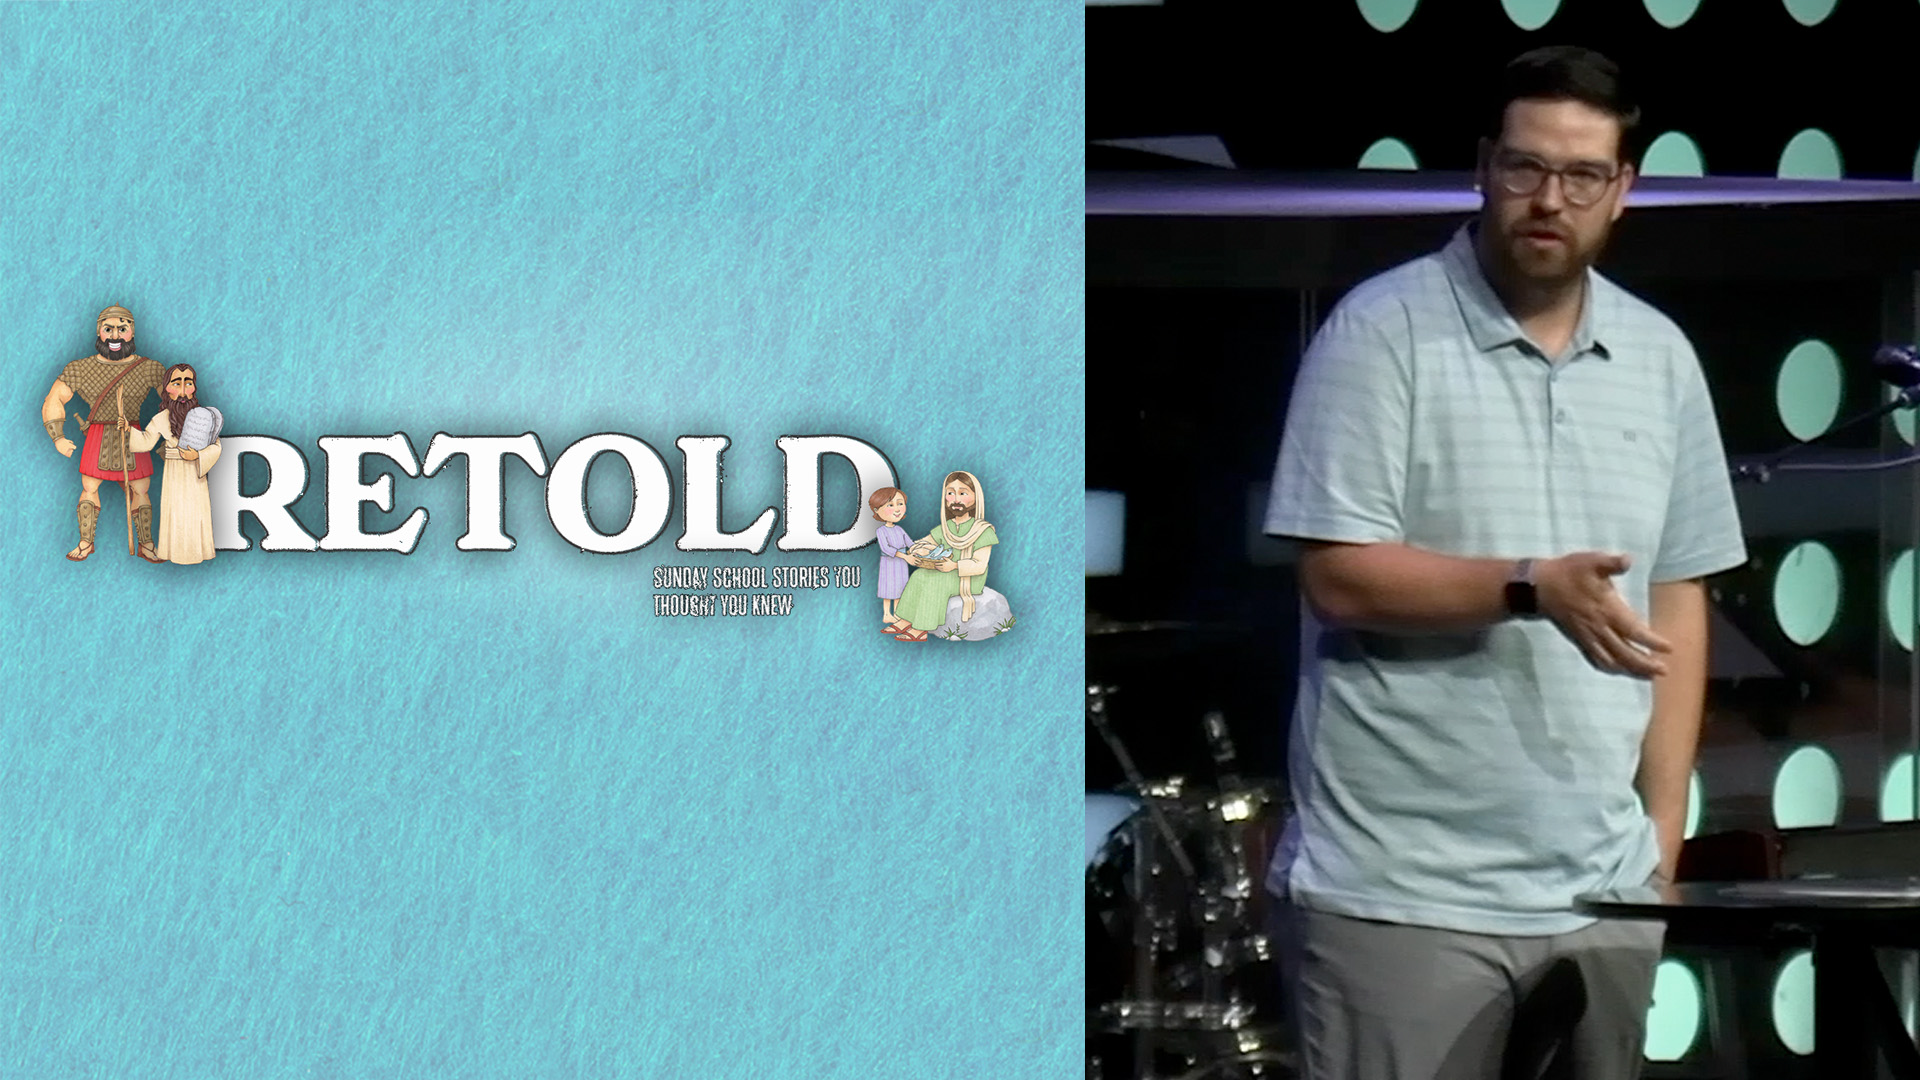 Retold::Sunday School Stories You Thought You Knew::Feeding the 5,000